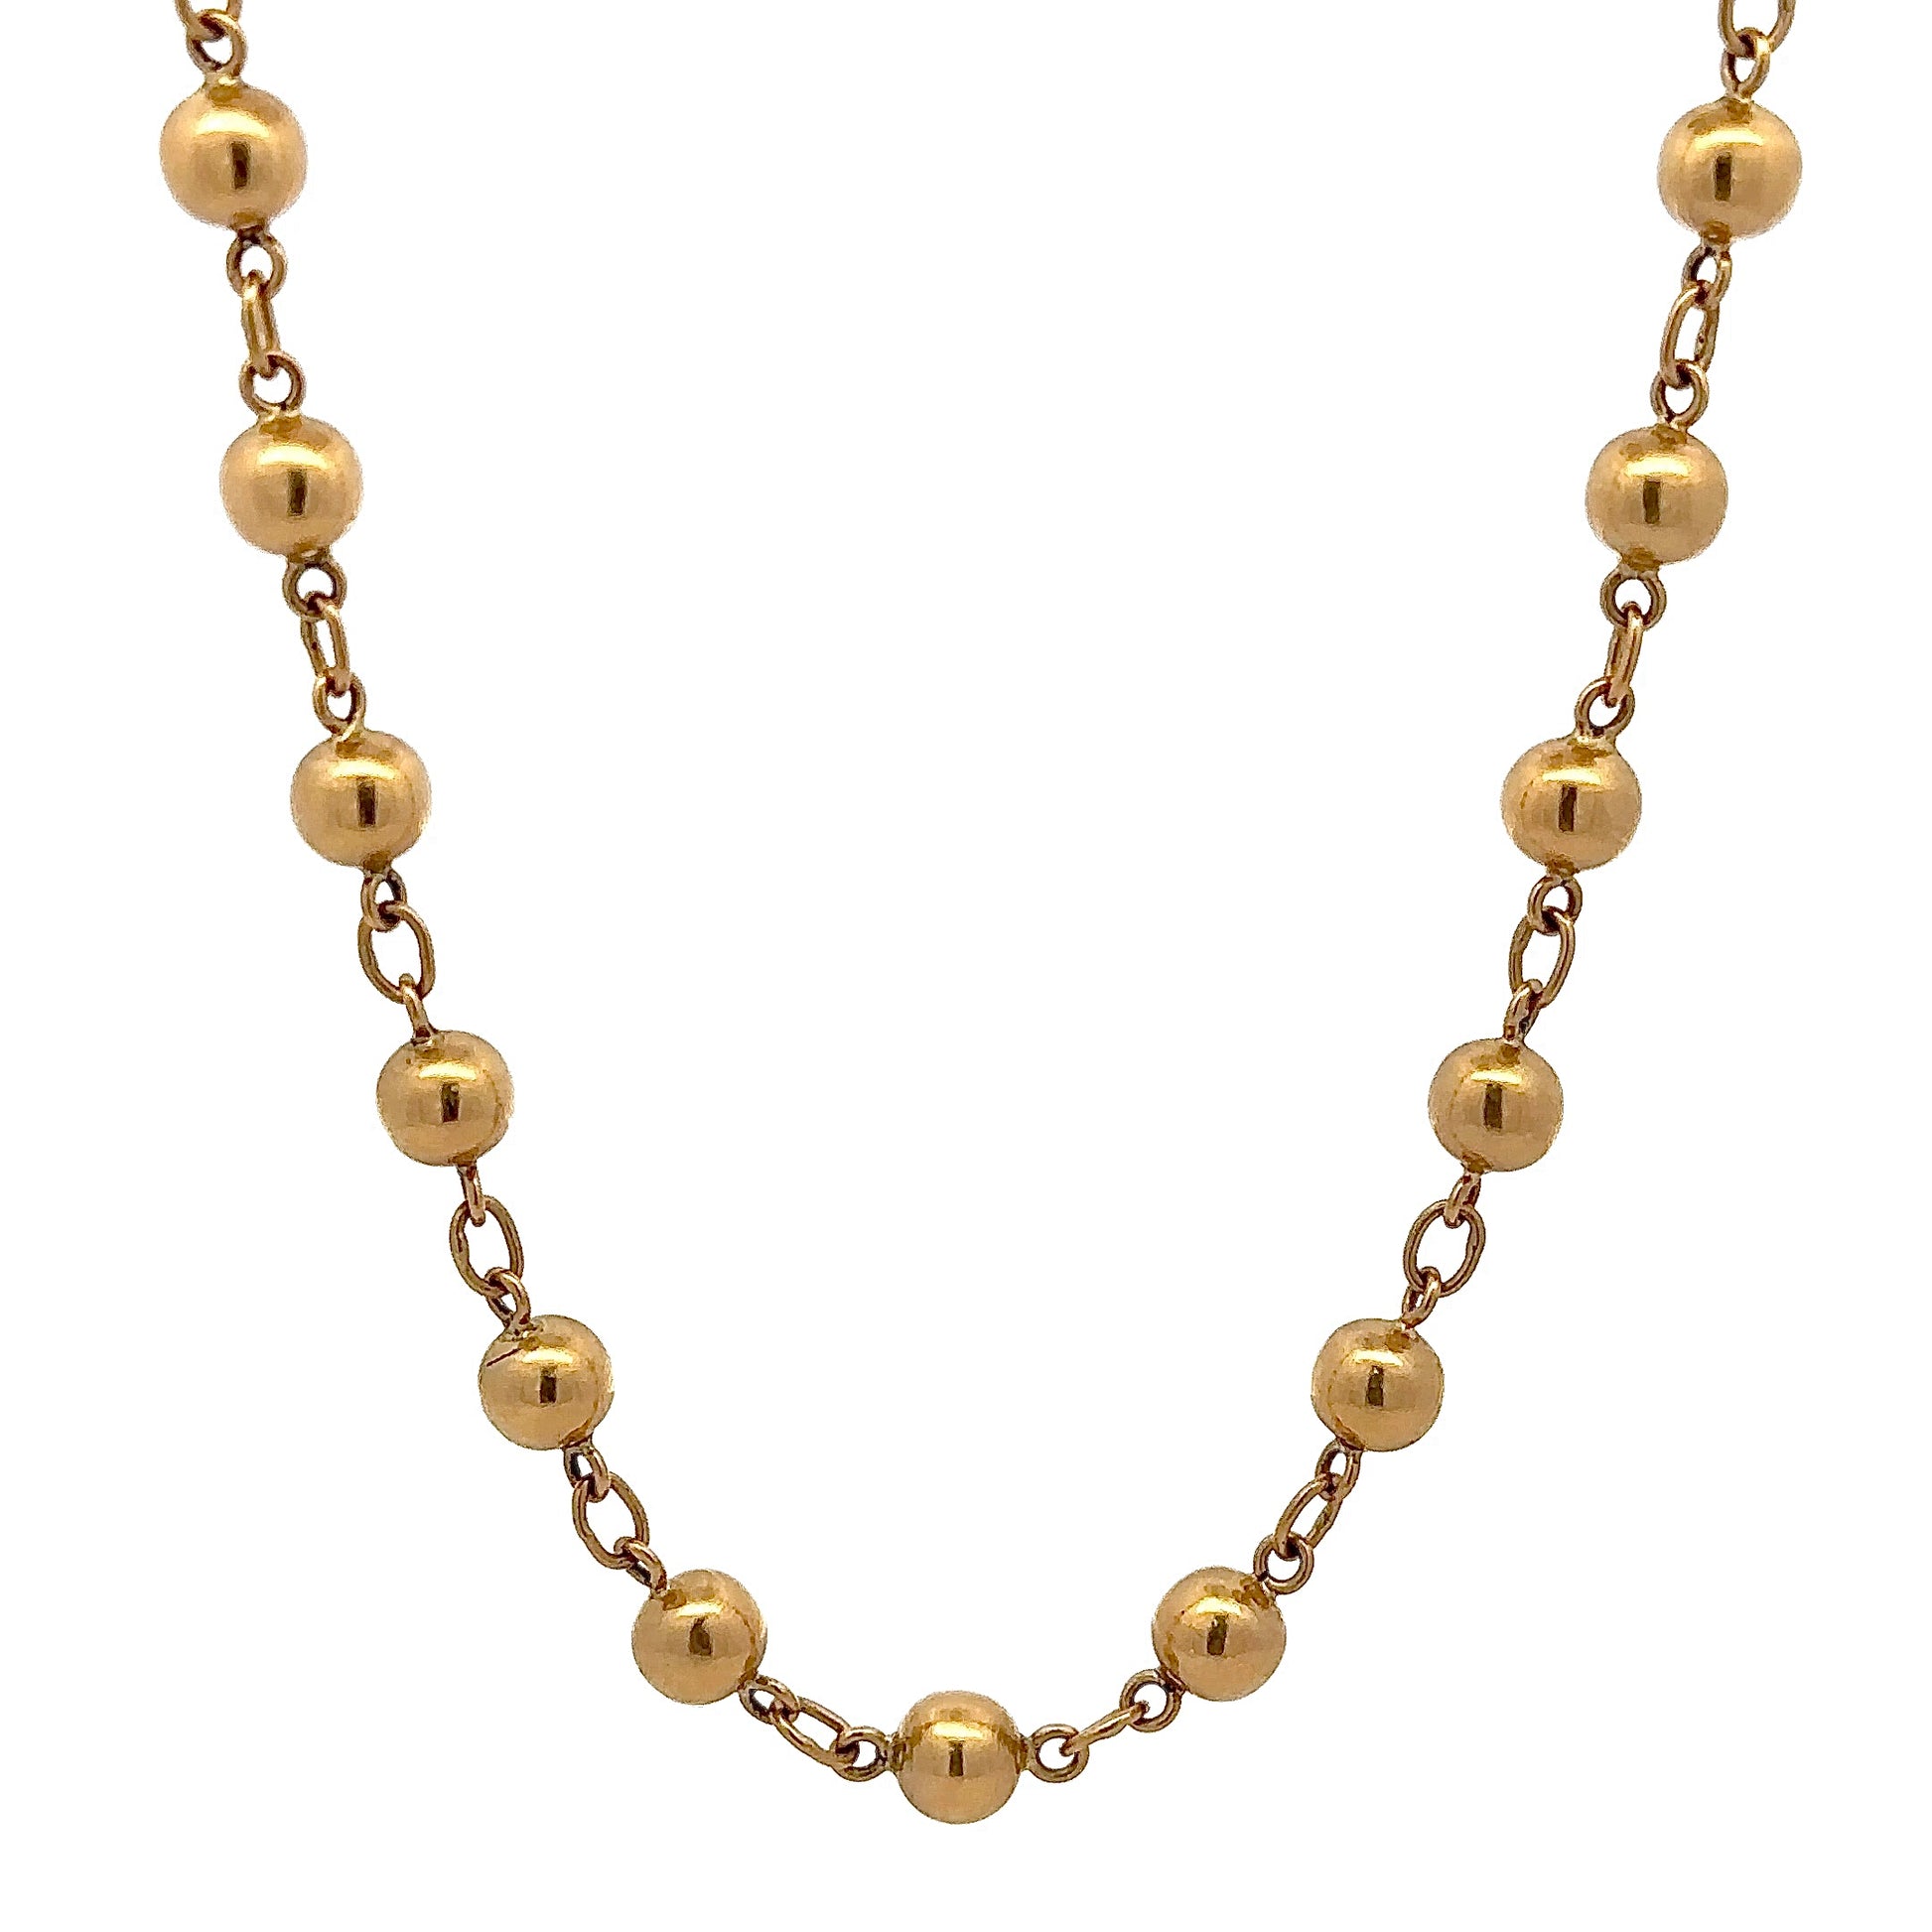 hanging yellow gold link chain with round gold balls